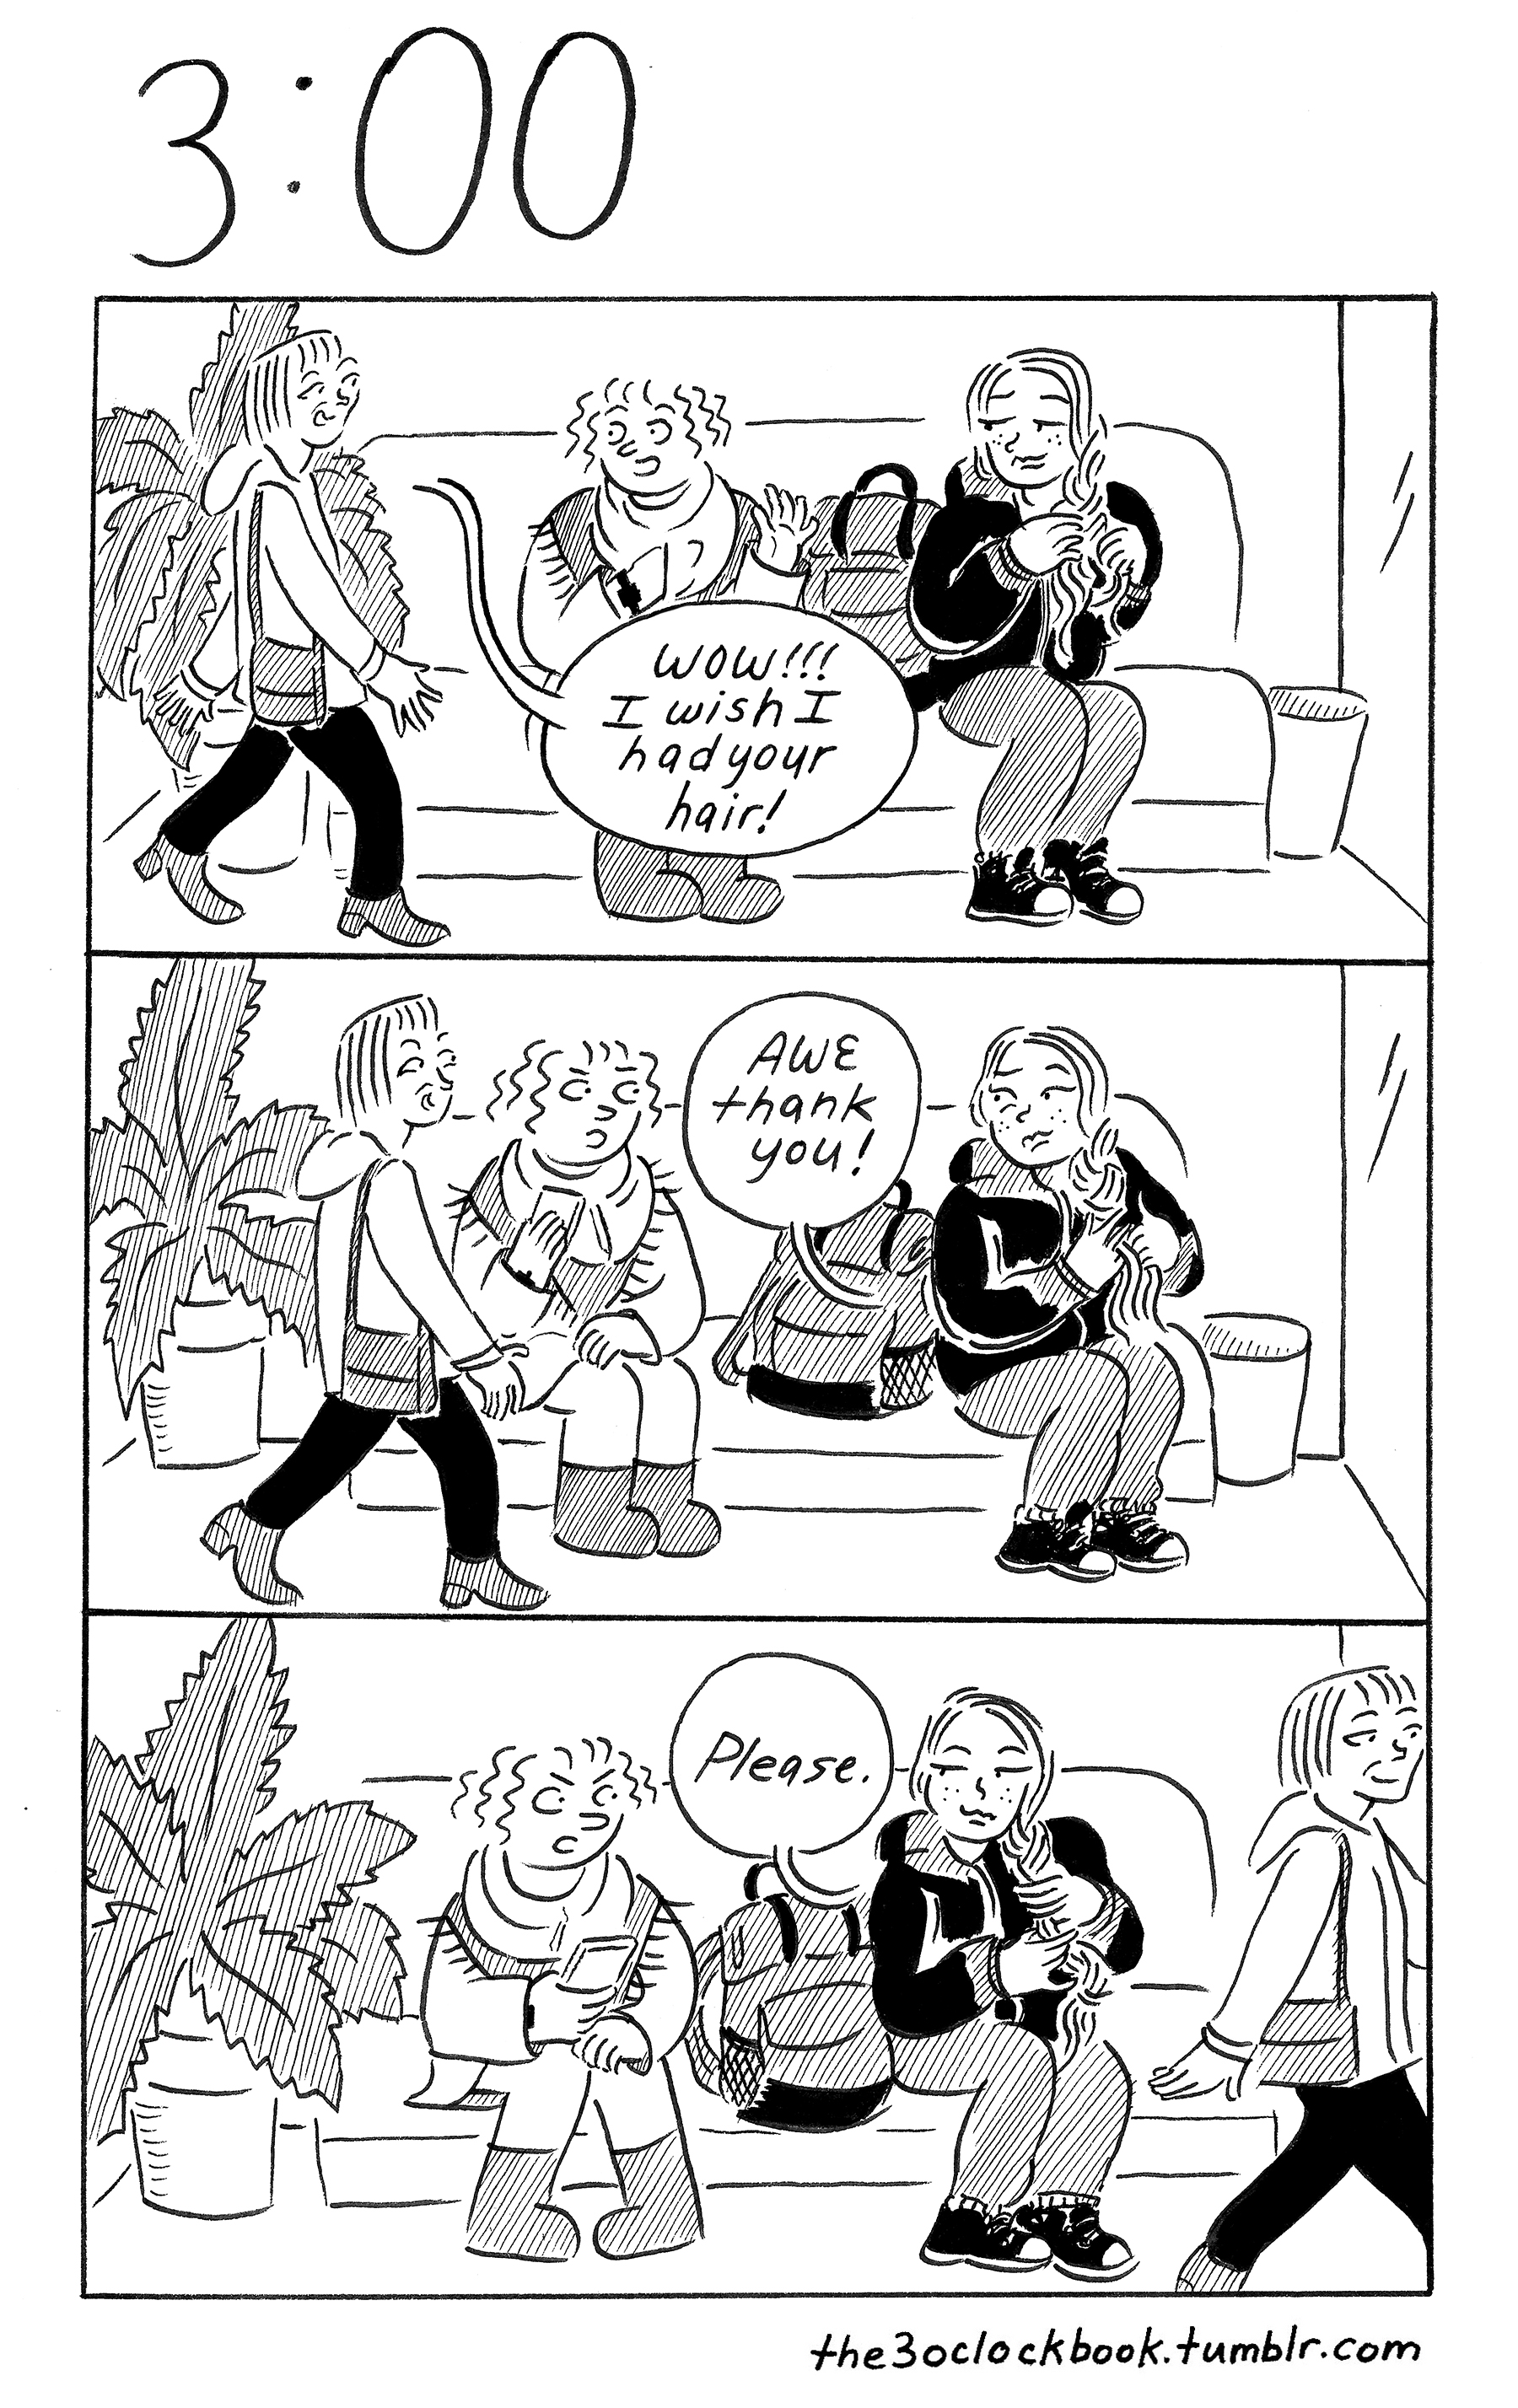 Beth Heinly's The 3:00 Book comic featuring Annoying Girl